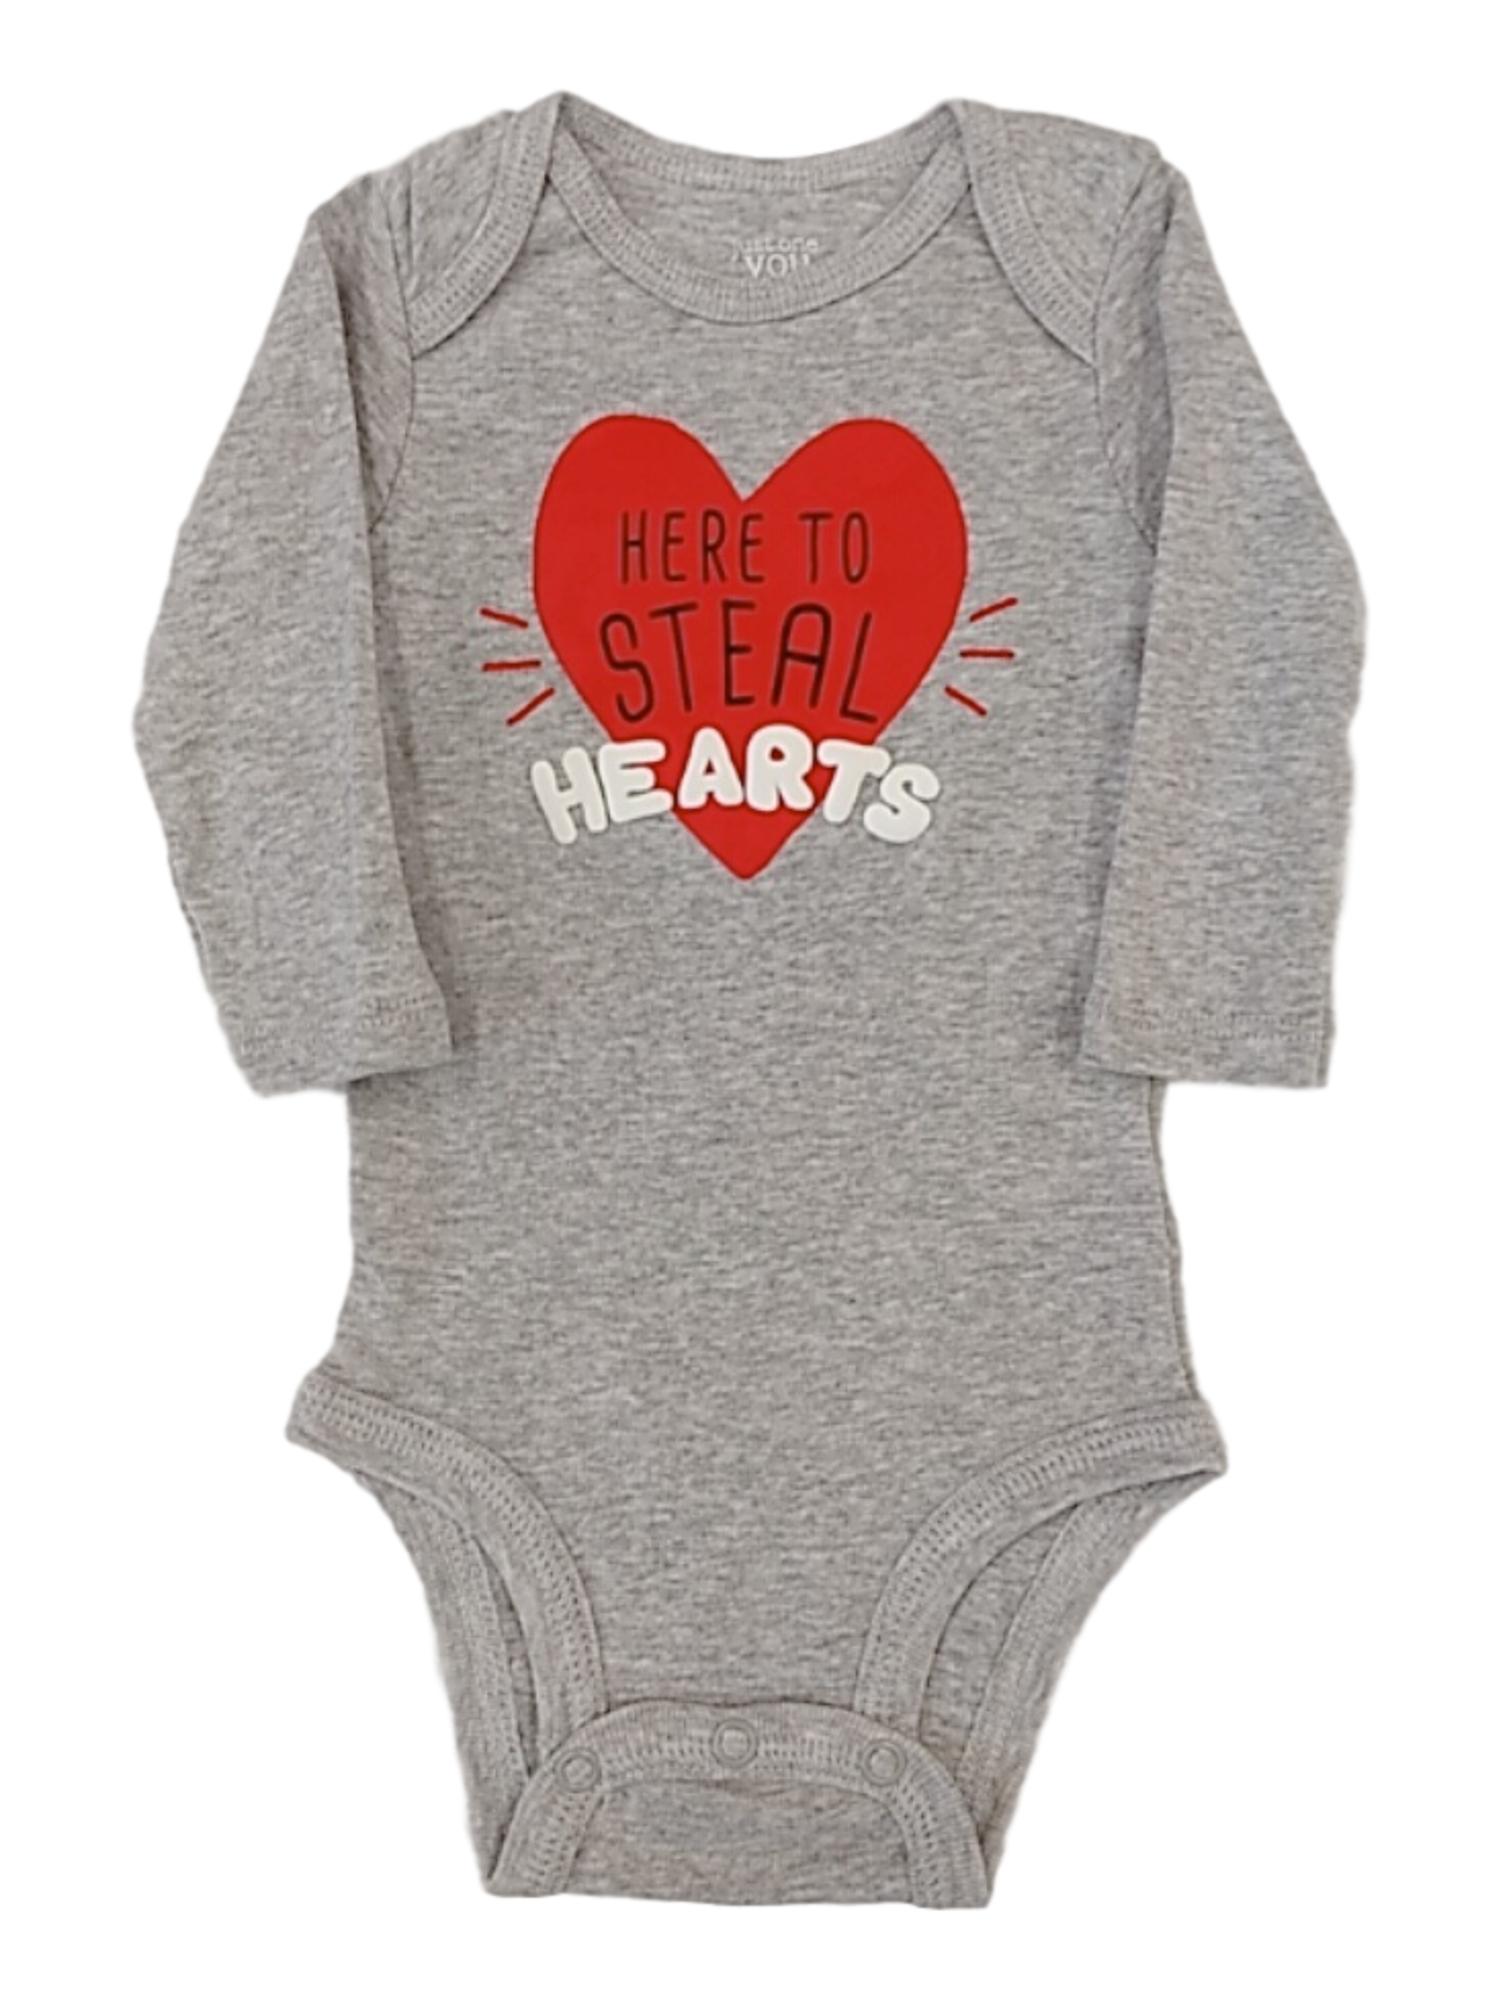 Carter's Infant Boys Gray Here to Steal Hearts Bodysuit Baby Valentines Day Creeper